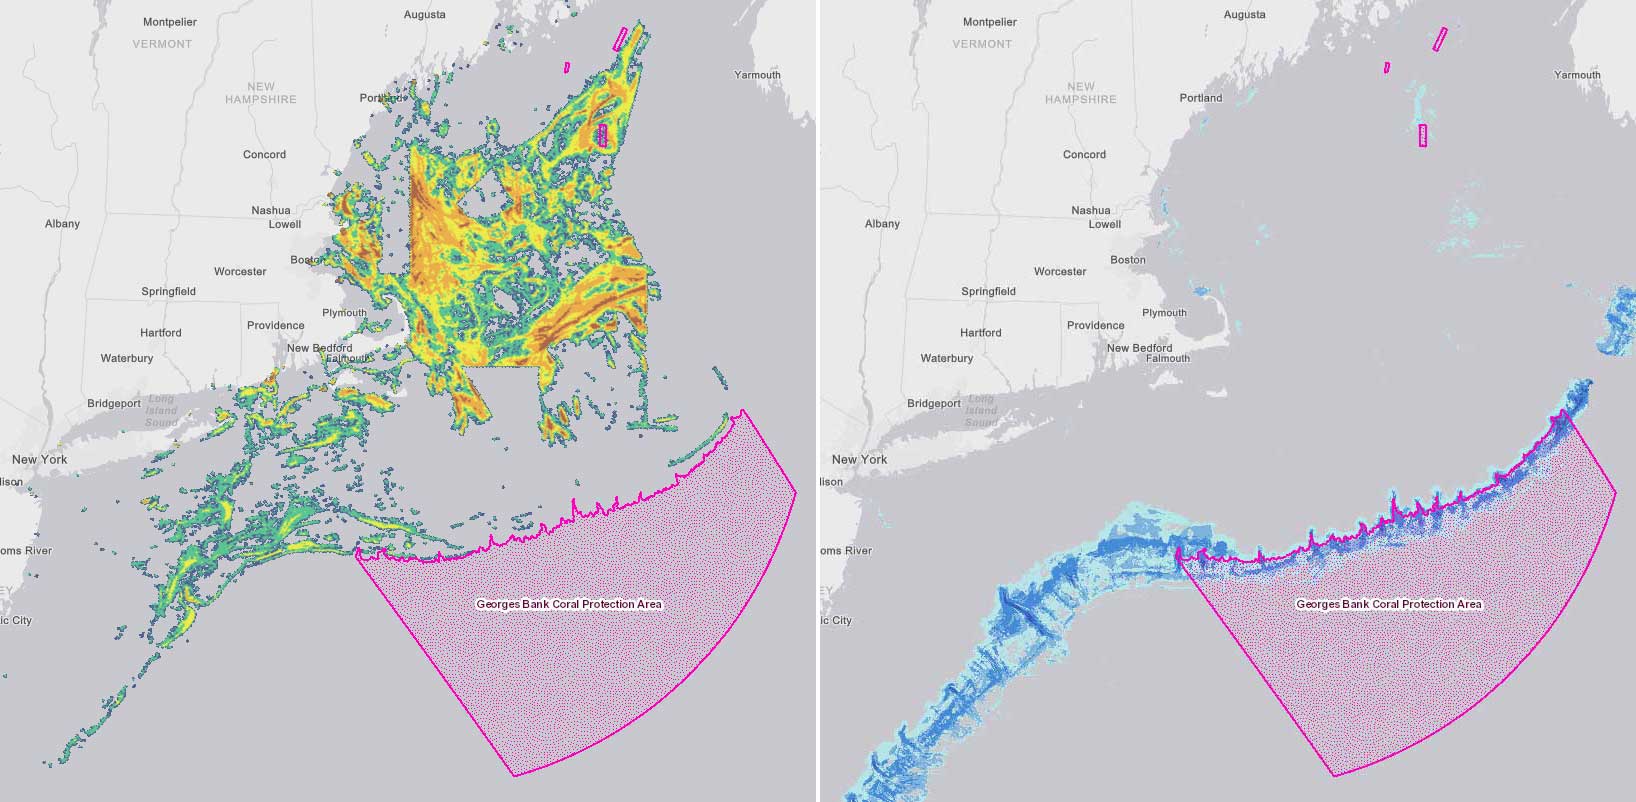 Pink areas represent the Coral Protection Zones and Dedicated Habitat Research Area that were selected by the New England Fishery Management Council and implemented by the Department of Commerce. Other colors indicate low (blue) to very high (red) groundfish vessel activity (at speeds less than 4 knots) in 2015-2016.